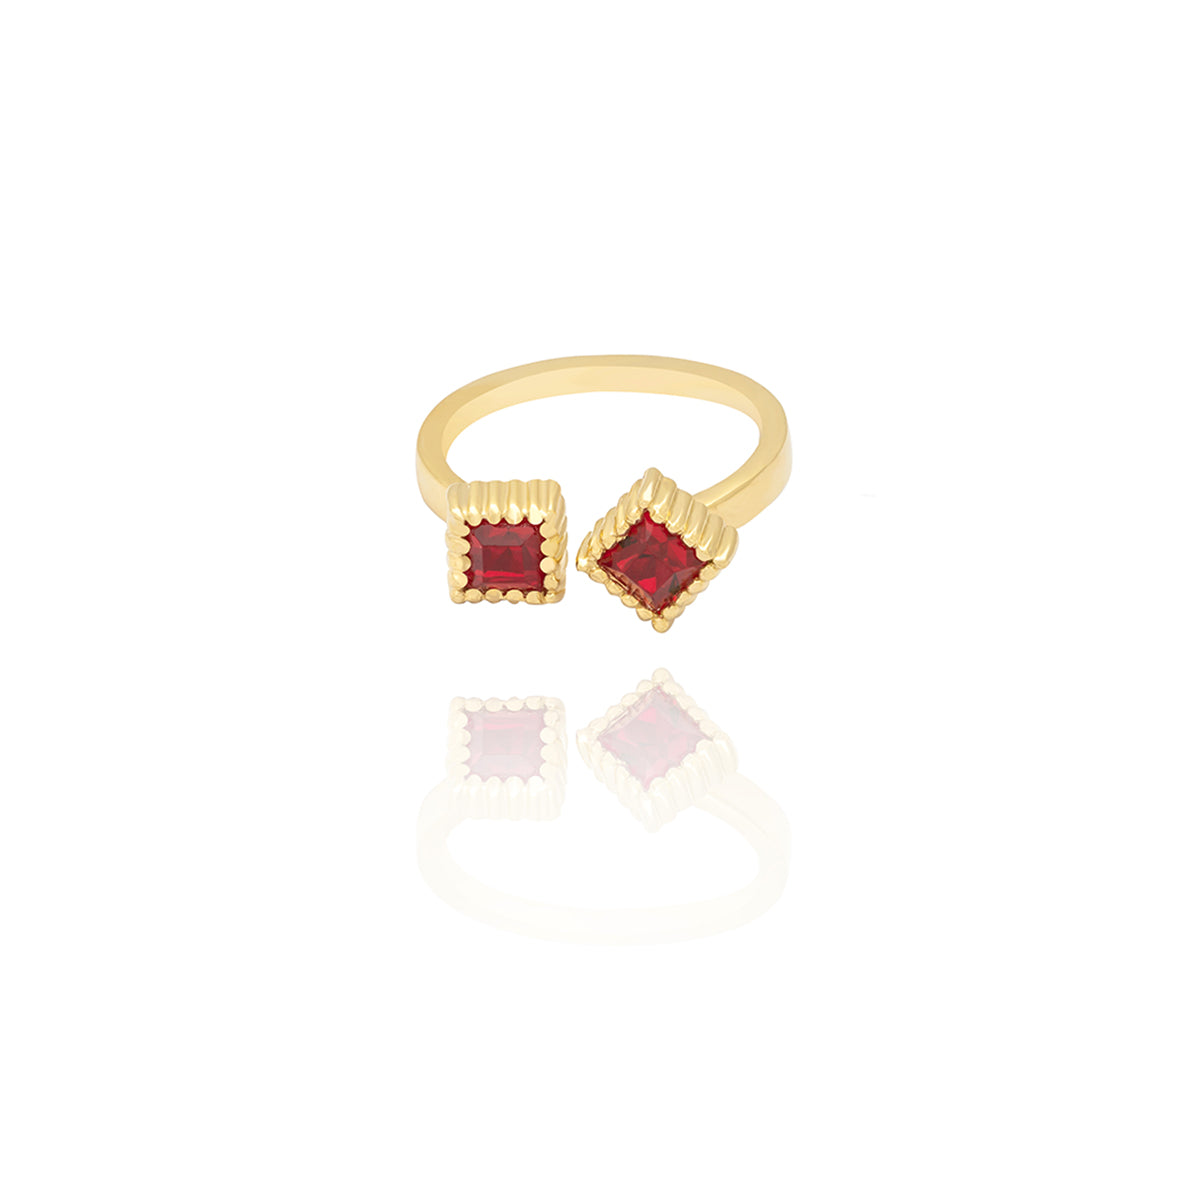 Open Ring Adorned with Two Exquisite Red Semi-Precious Stones